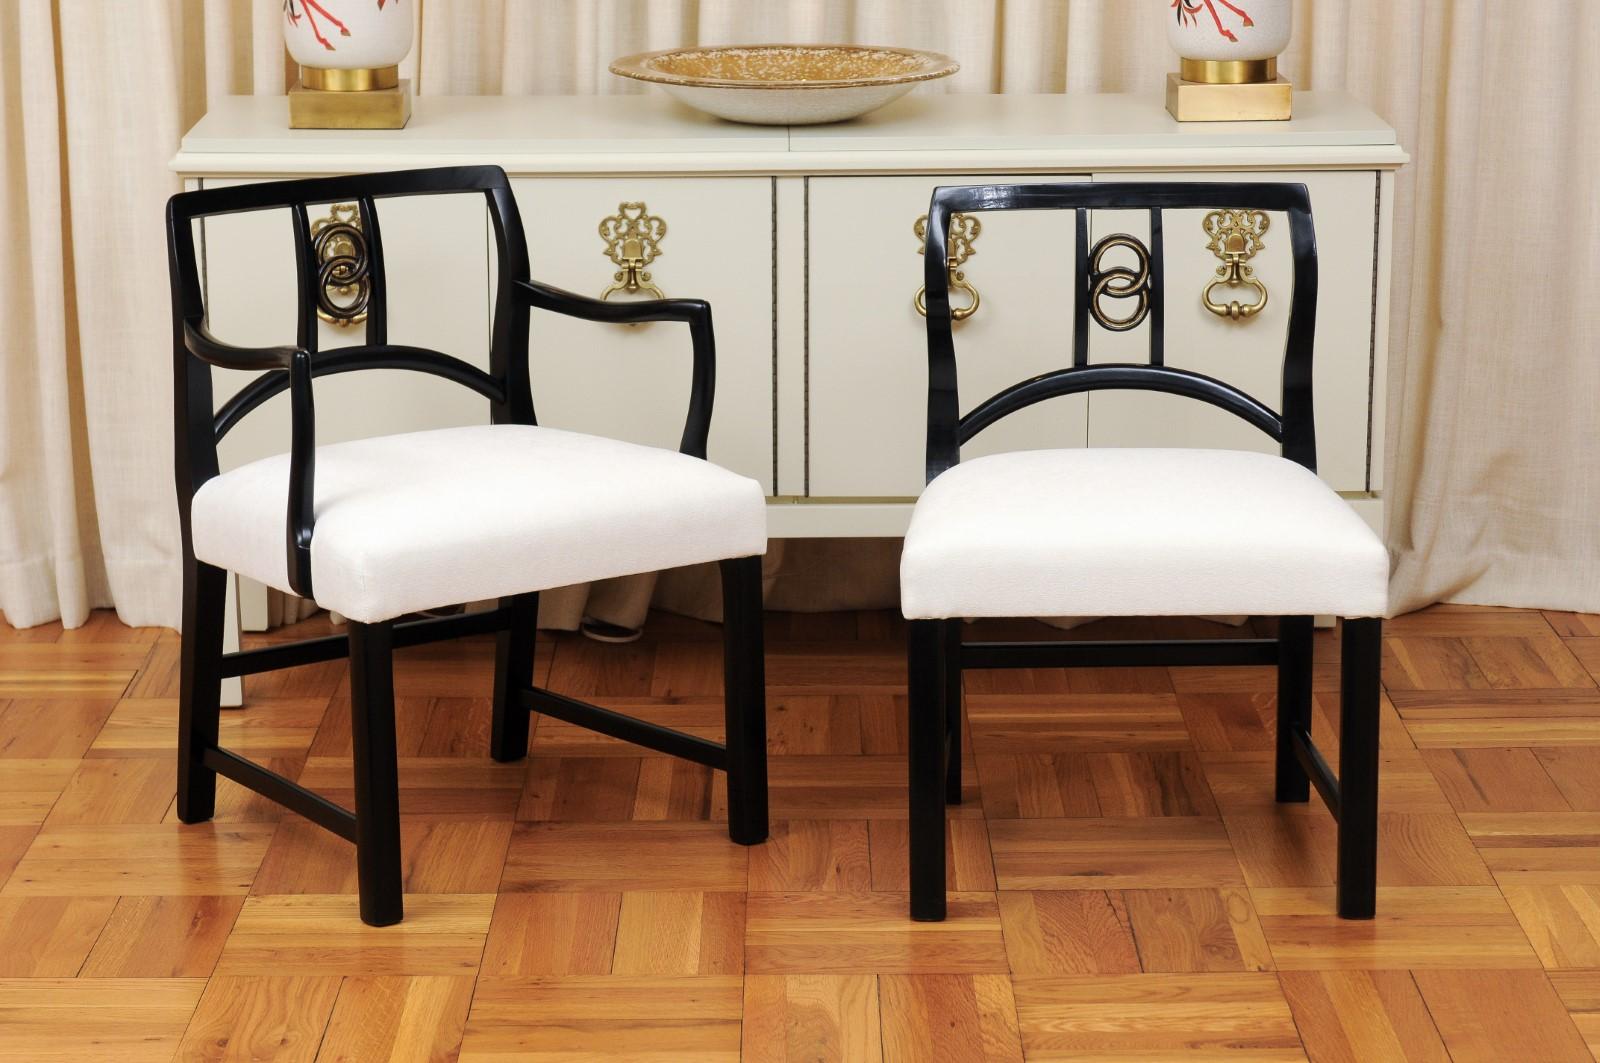 This magnificent set of dining chairs is shipped as professionally photographed and described in the listing narrative: Meticulously professionally restored, newly upholstered and completely installation ready. This rare Taylor set is unique on the